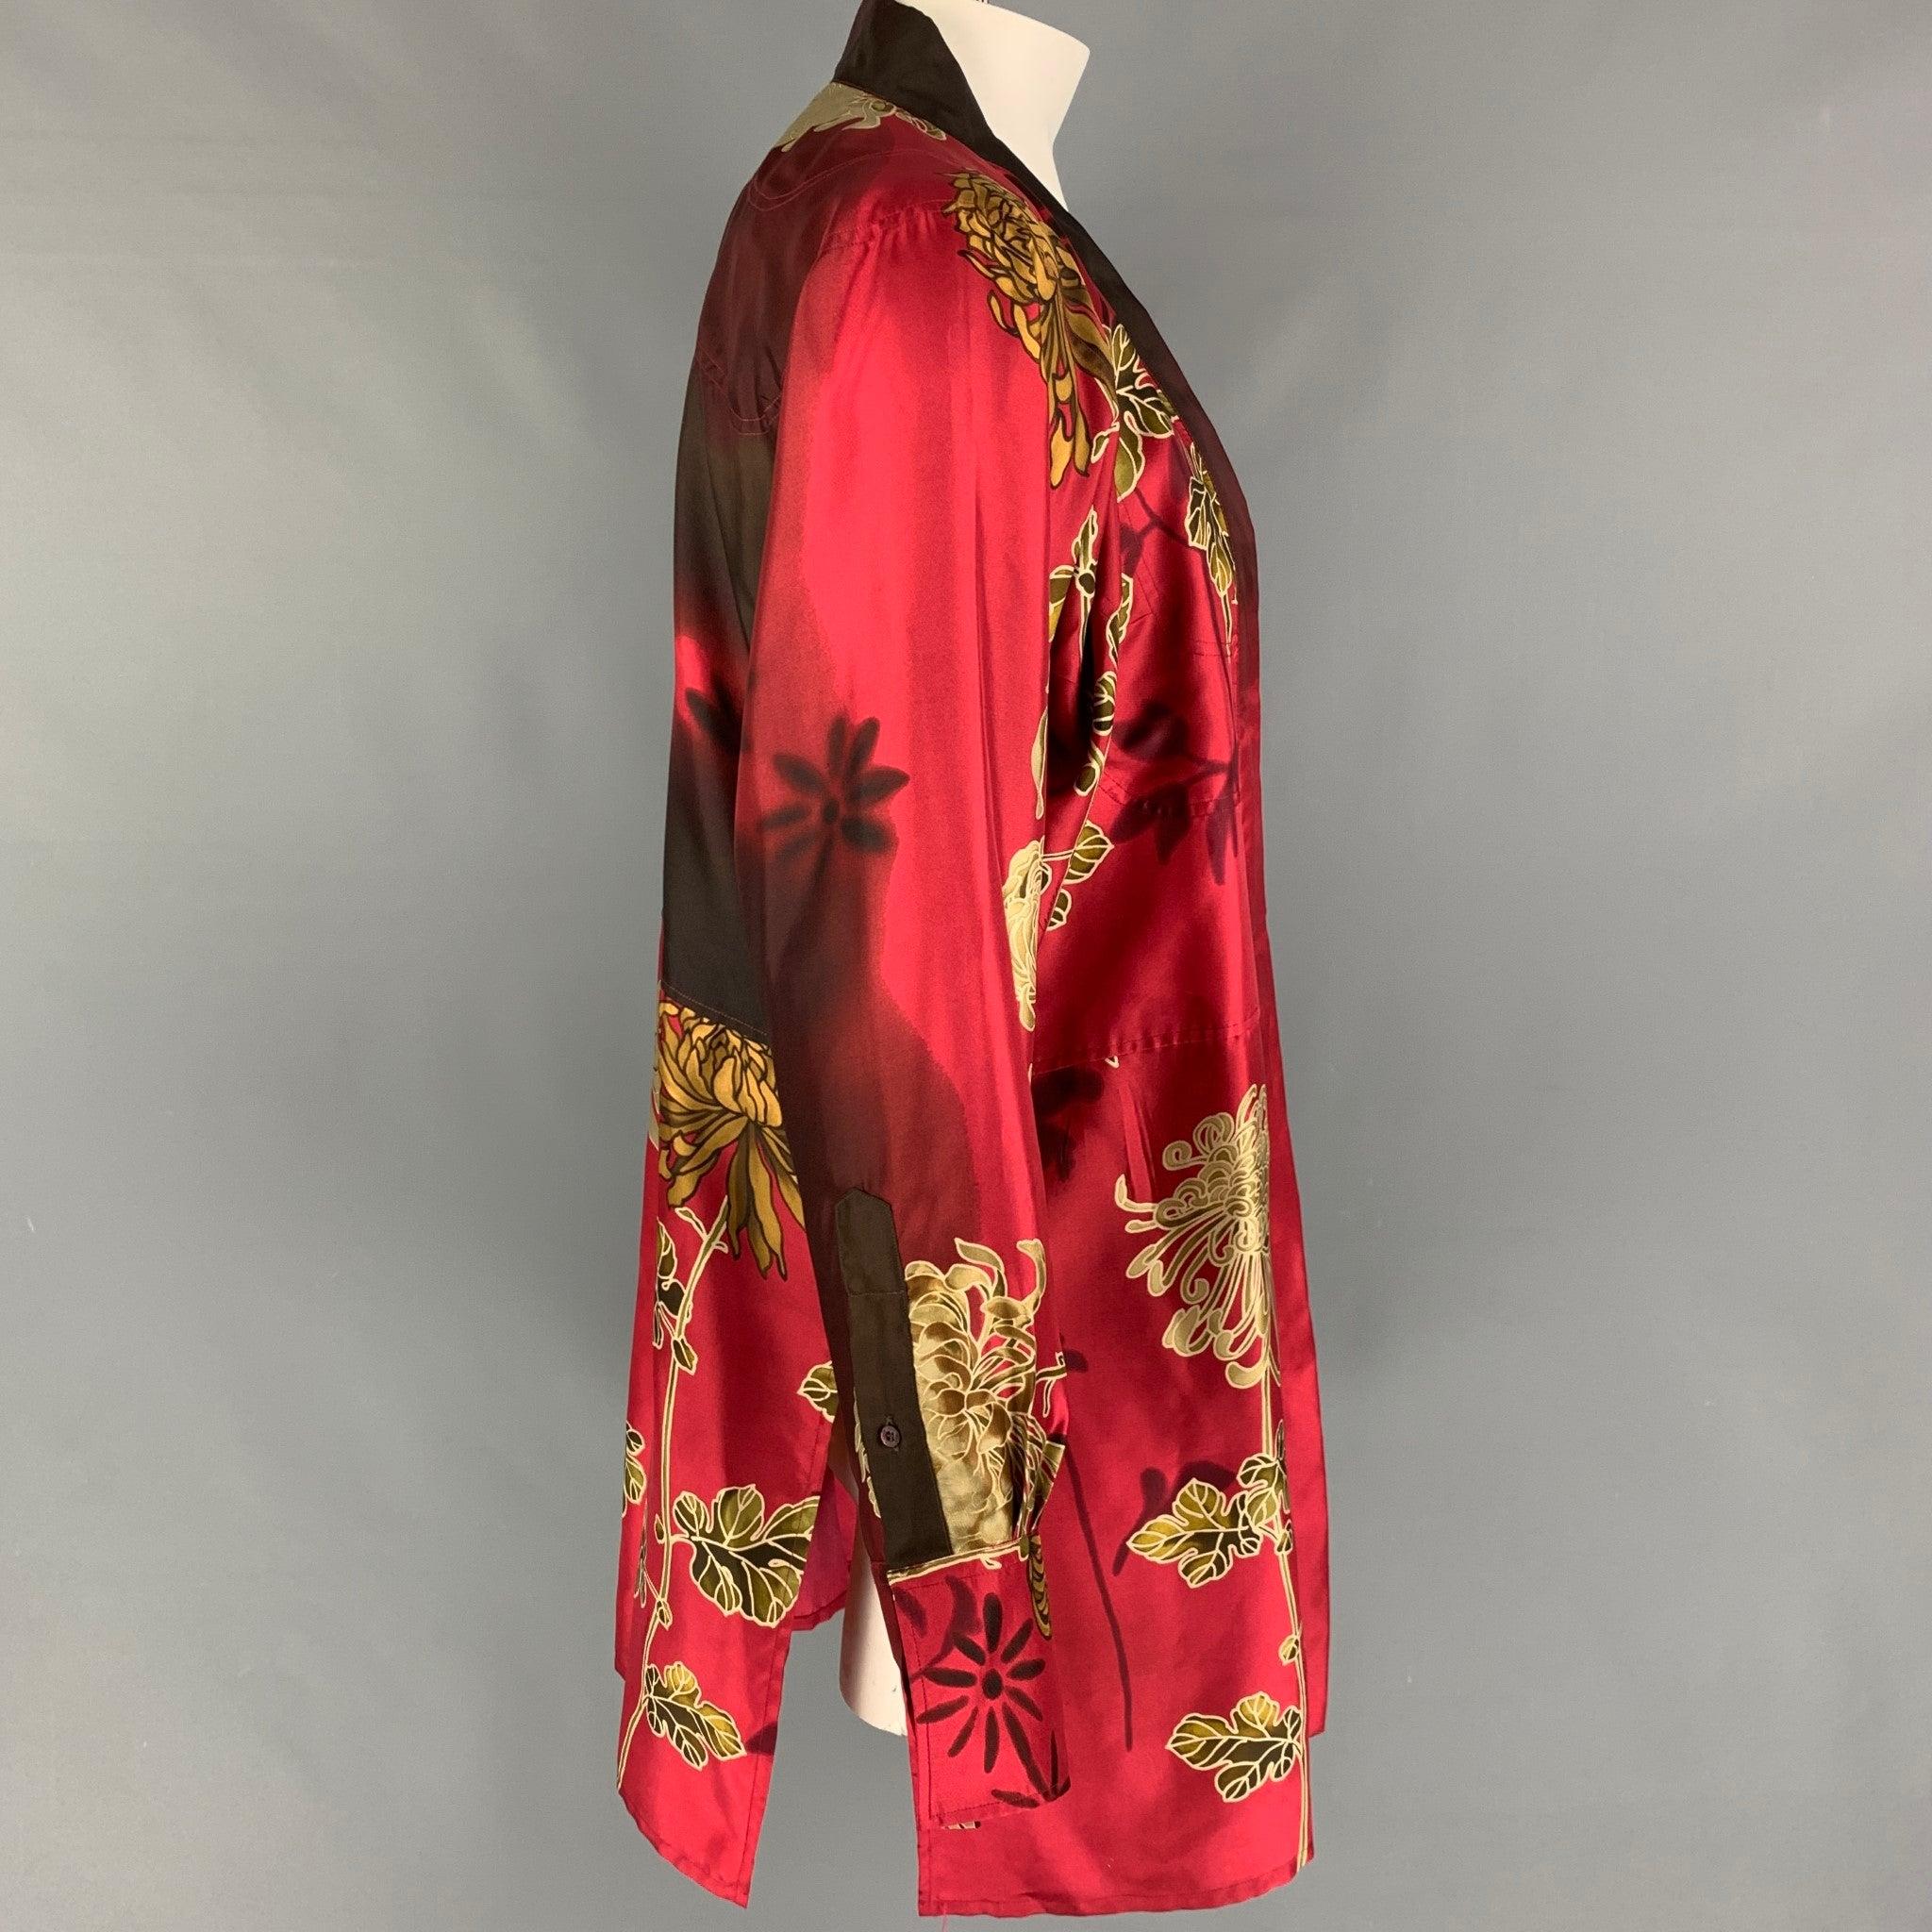 Vintage GUCCI by TOM FORD SS 2001 long sleeve shirt comes in a red & gold chrysanthemum floral print featuring a tunic style, buttoned cuffs, side slits, and a open front. Comes with tags. Made in Italy.
Very Good Pre-Owned Condition.  

Marked:  